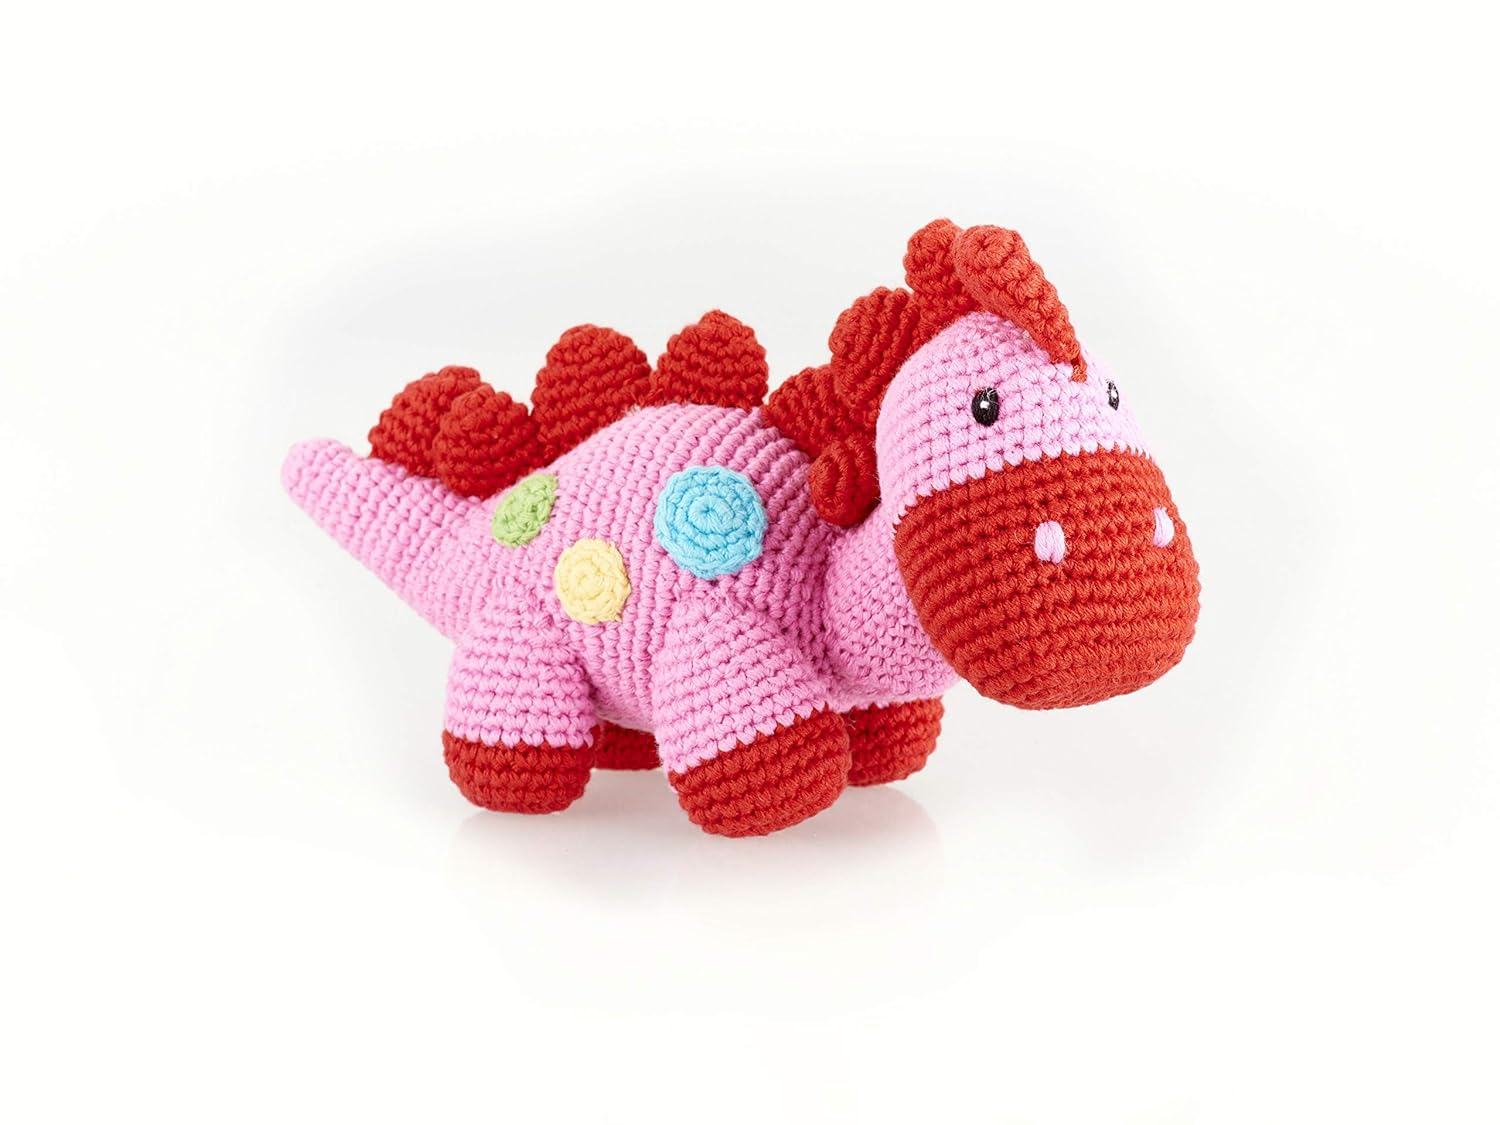 Pink and red crochet crochet dinosaur toy